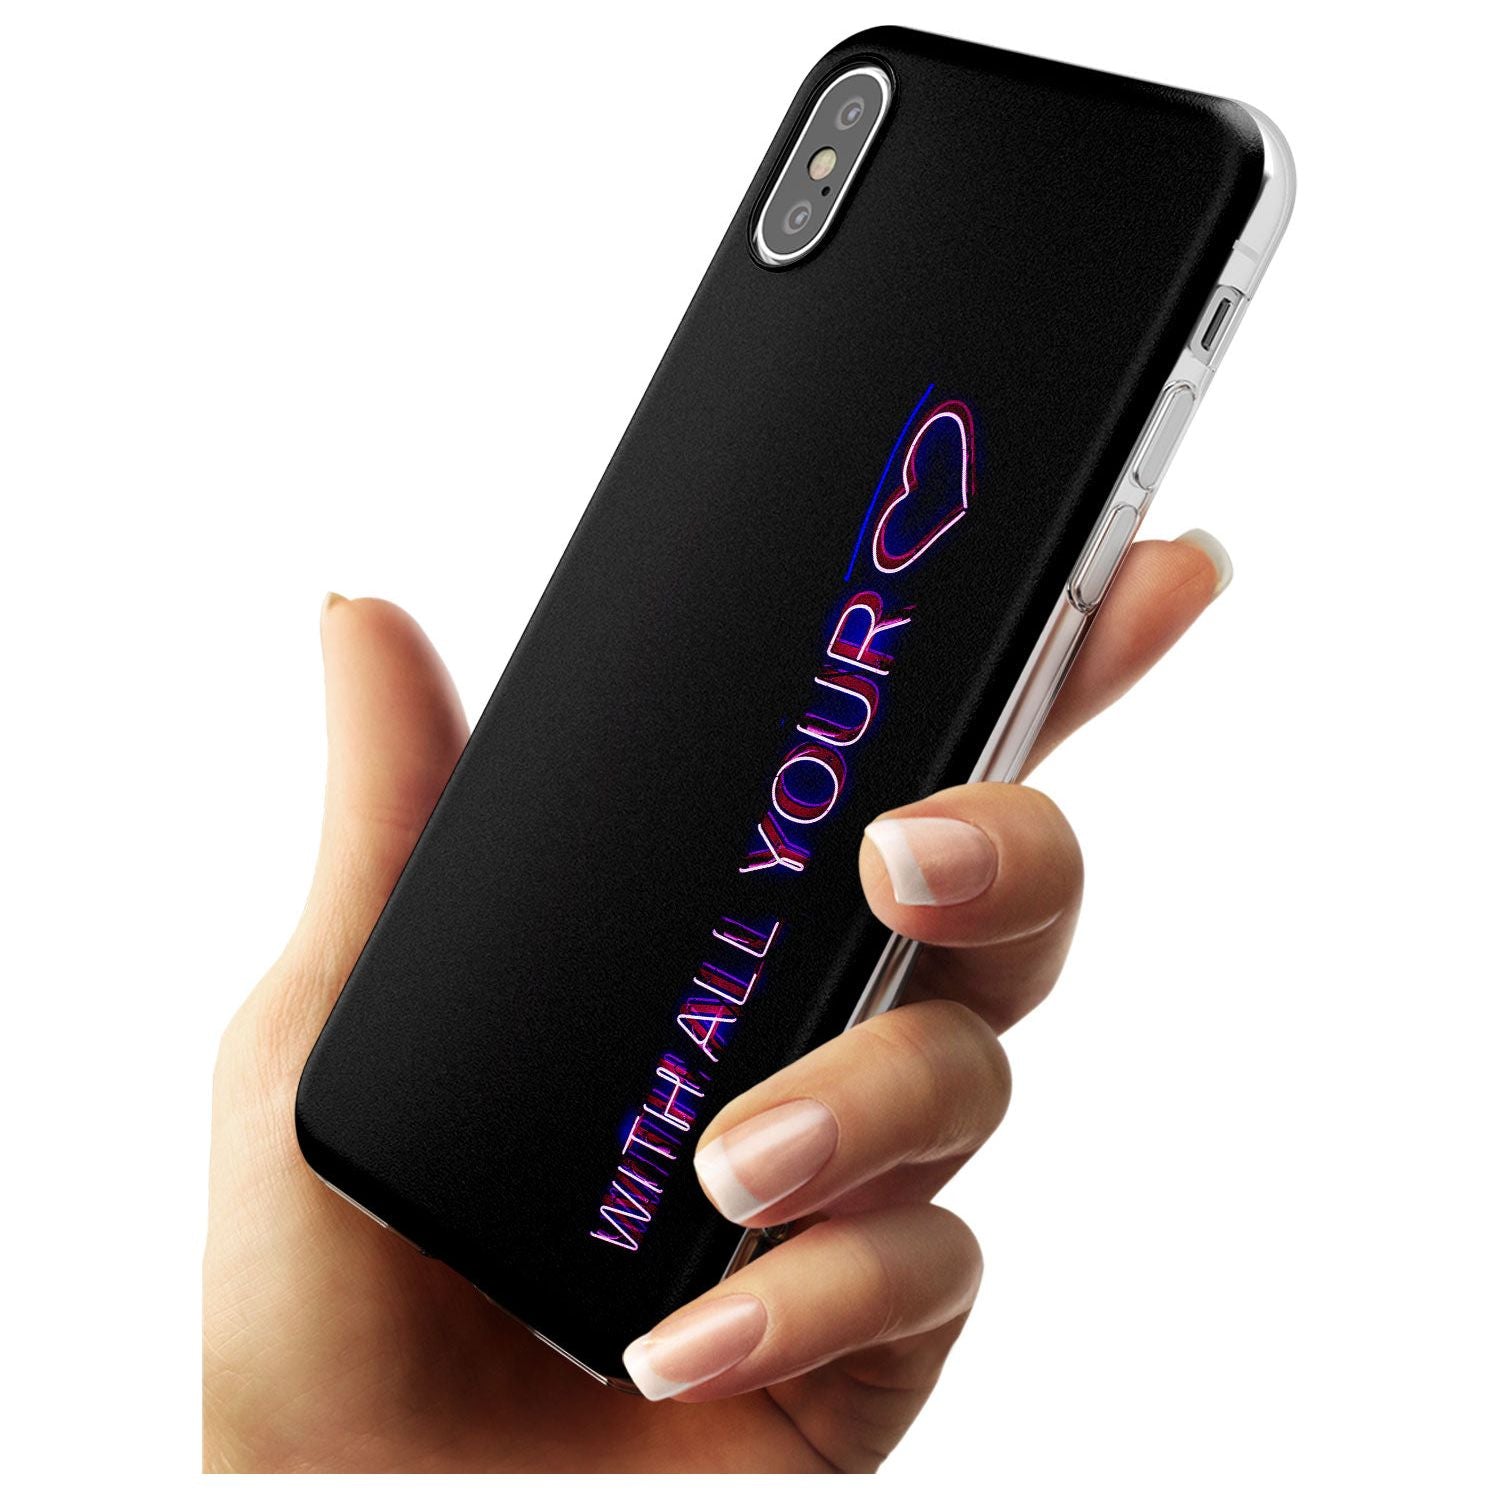 With All Your Heart Neon Sign Slim TPU Phone Case Warehouse X XS Max XR